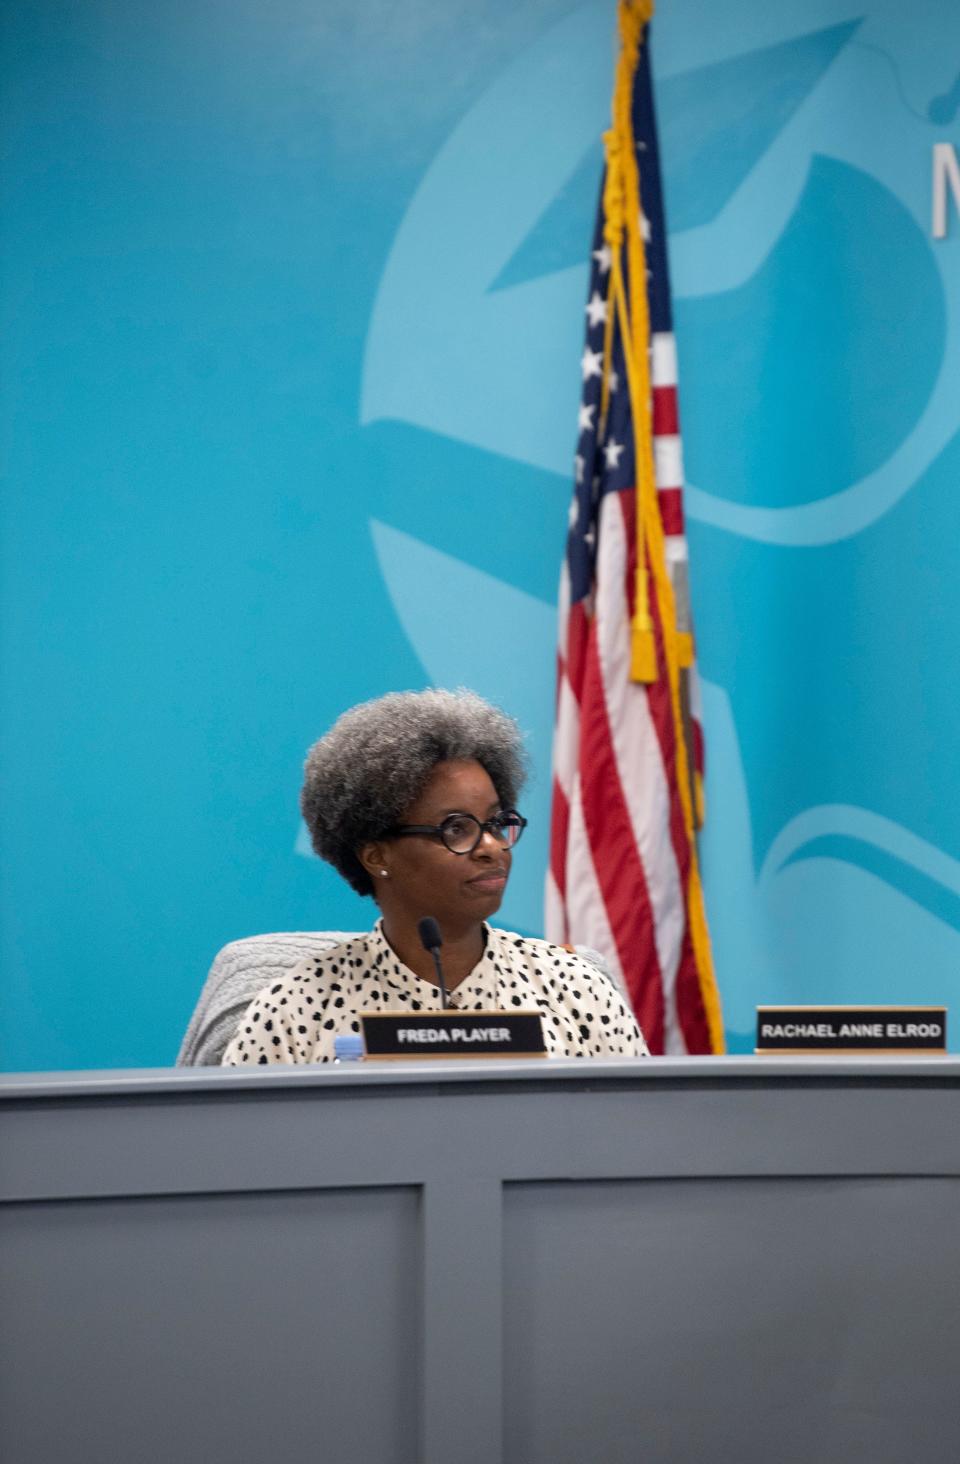 Vice Chair Freda Player listens during an MNPS board meeting on Feb. 27.